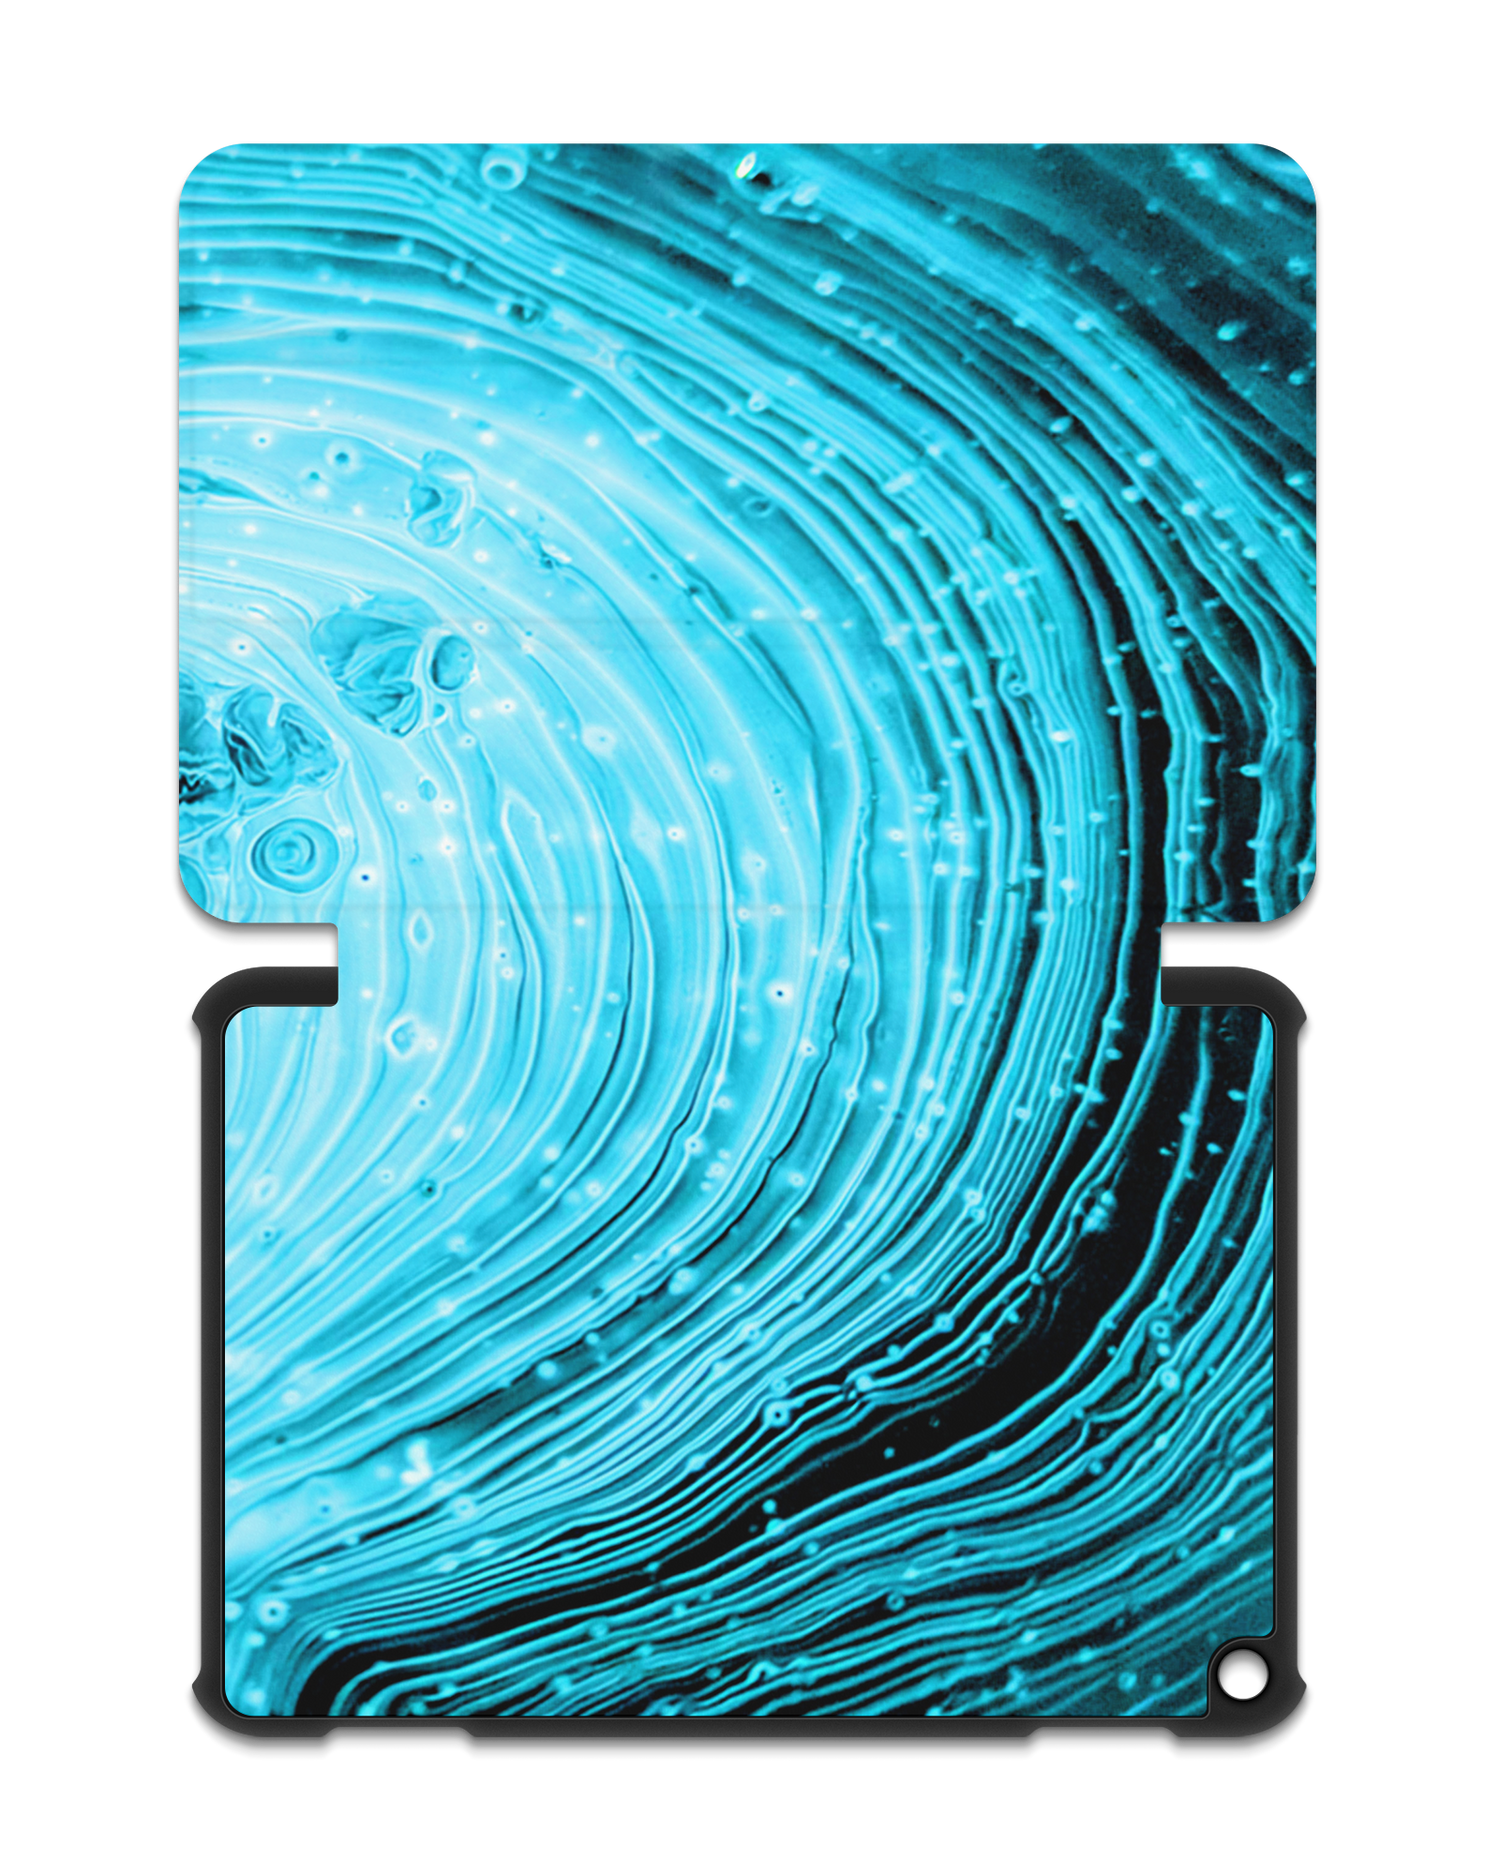 Turquoise Ripples Tablet Smart Case for Amazon Fire HD 8 (2022), Amazon Fire HD 8 Plus (2022), Amazon Fire HD 8 (2020), Amazon Fire HD 8 Plus (2020): Opened